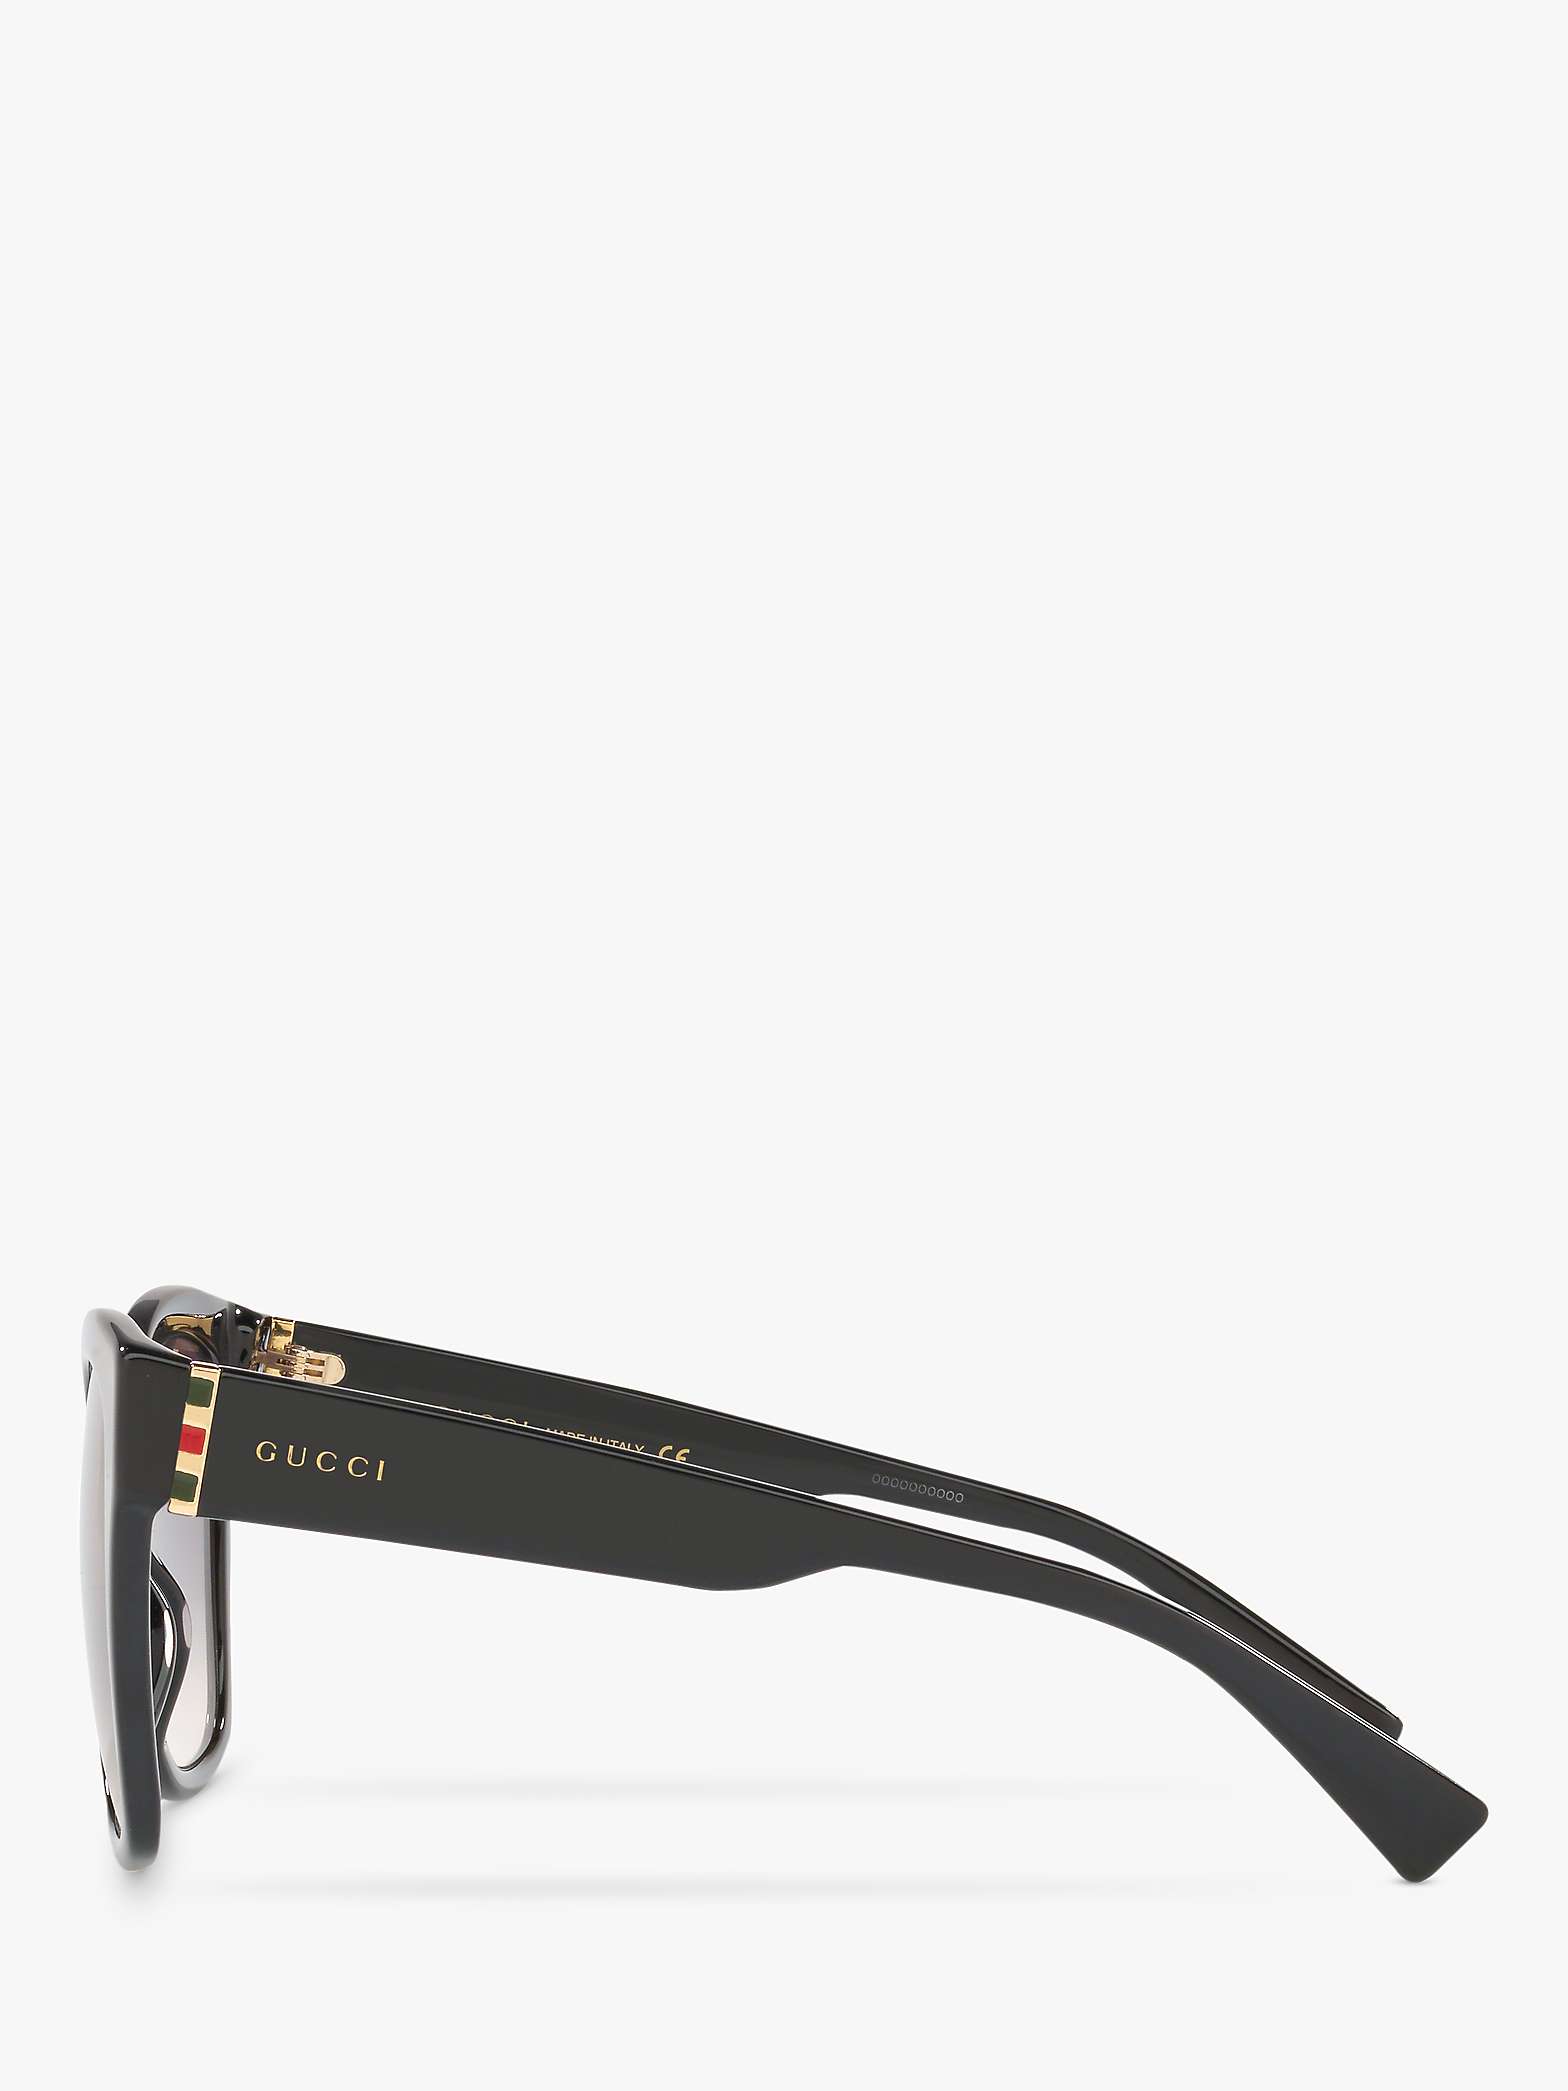 Buy Gucci GG0459S Women's Square Sunglasses Online at johnlewis.com